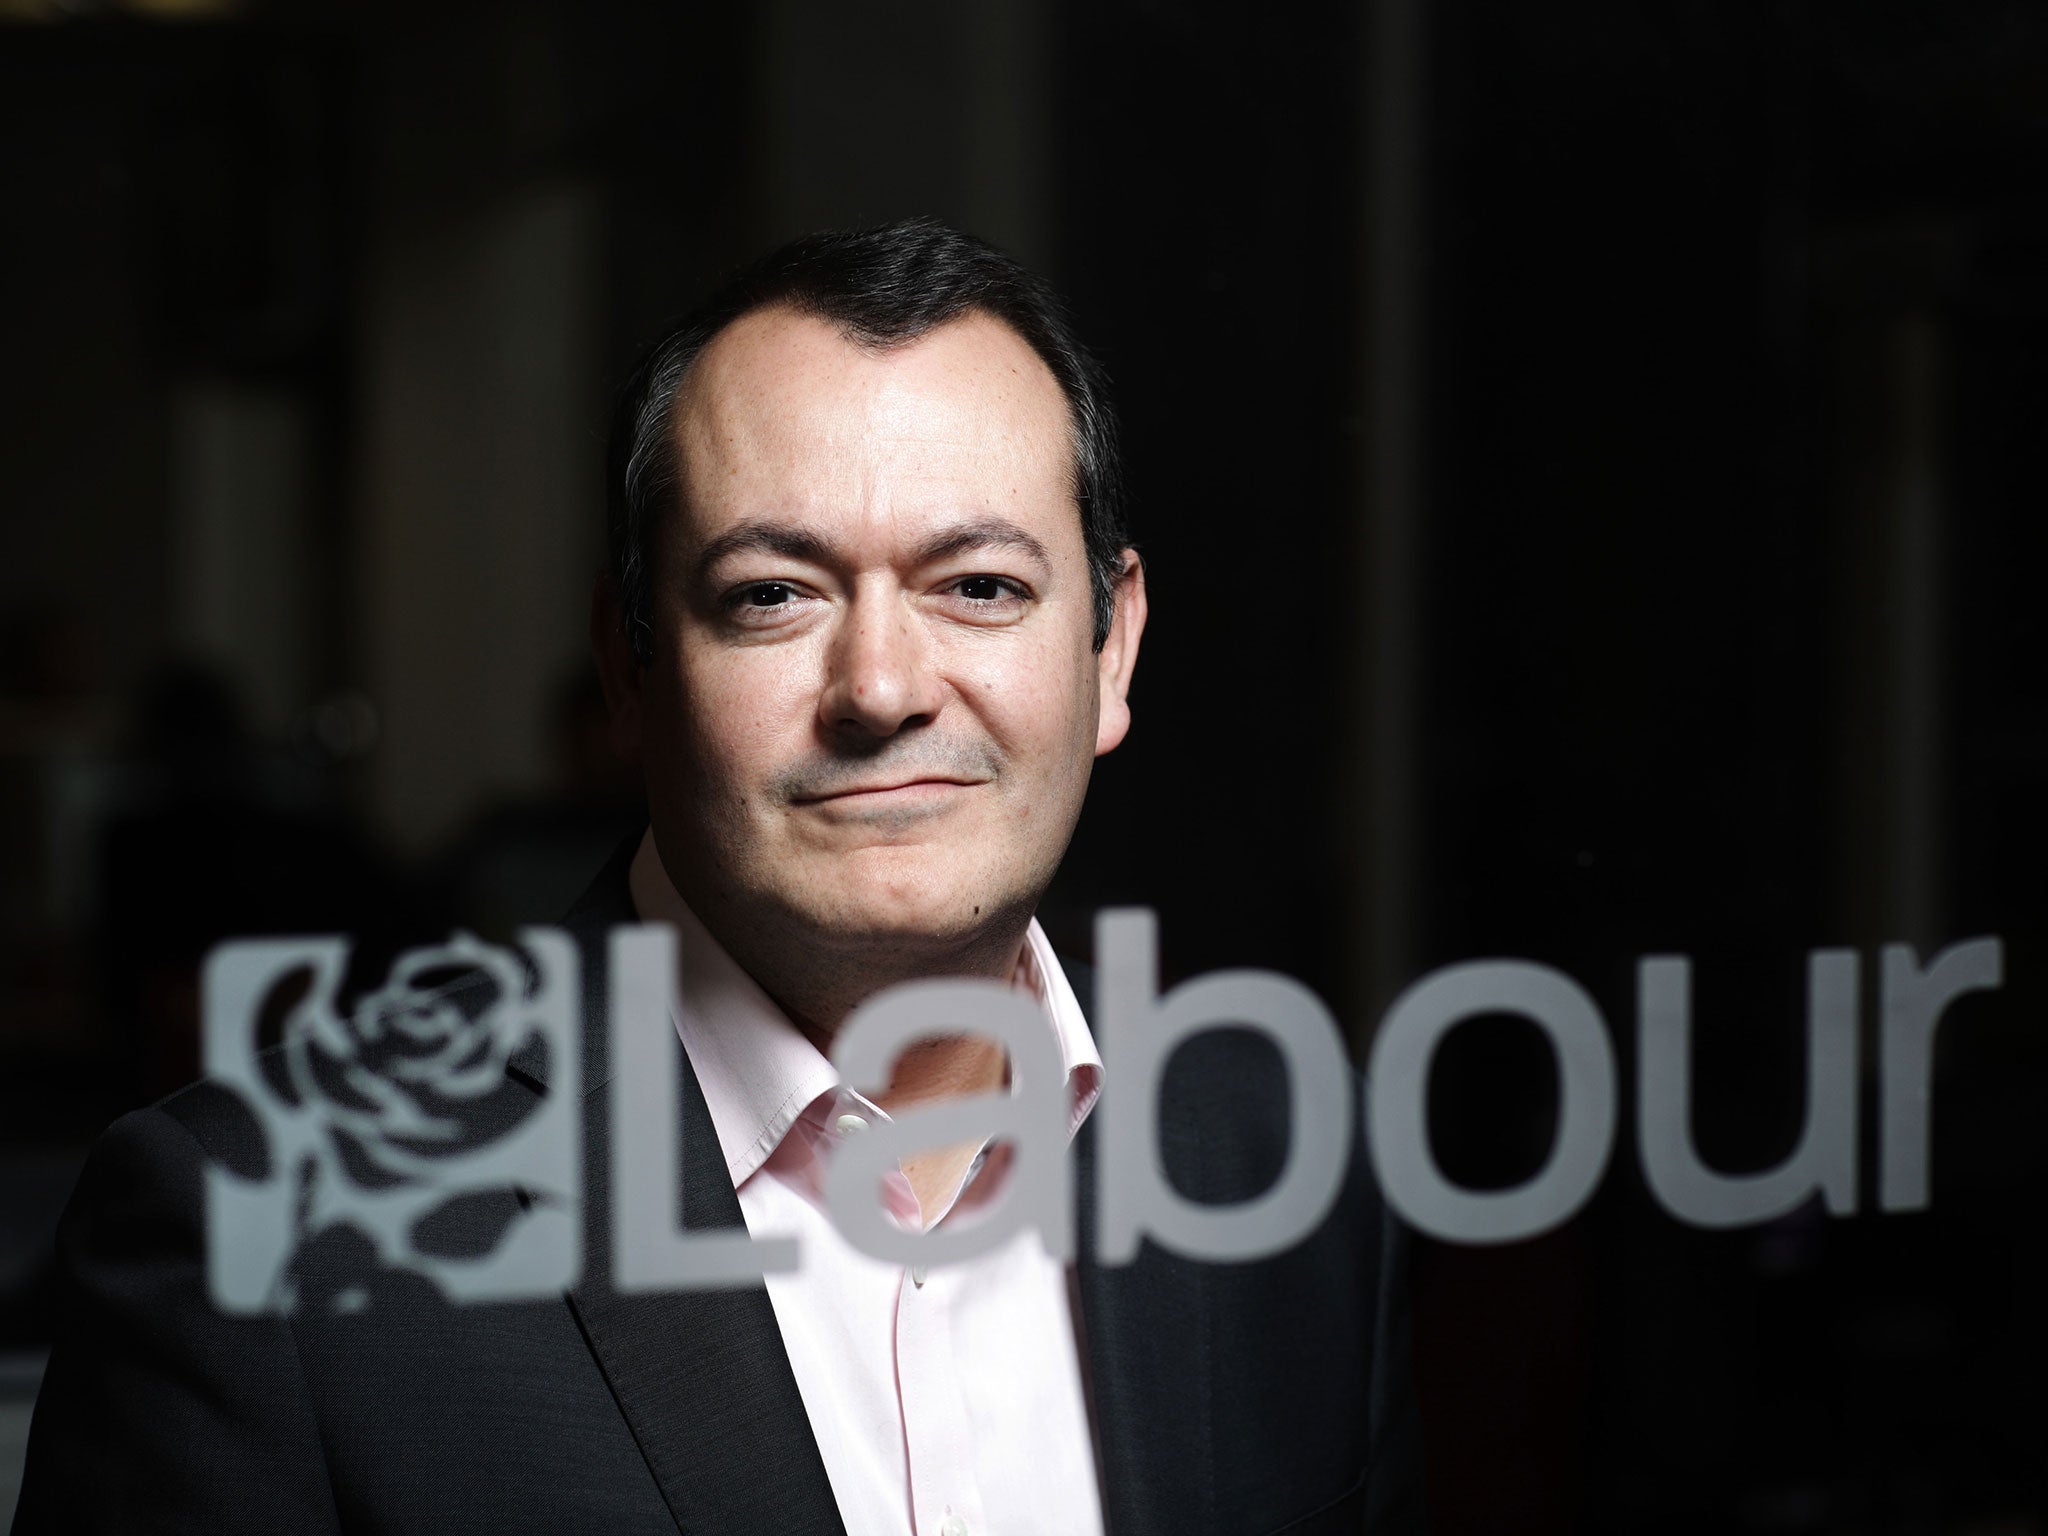 Mr Dugher said Jeremy Corbyn had 'learned about socialism in an expensive private school'